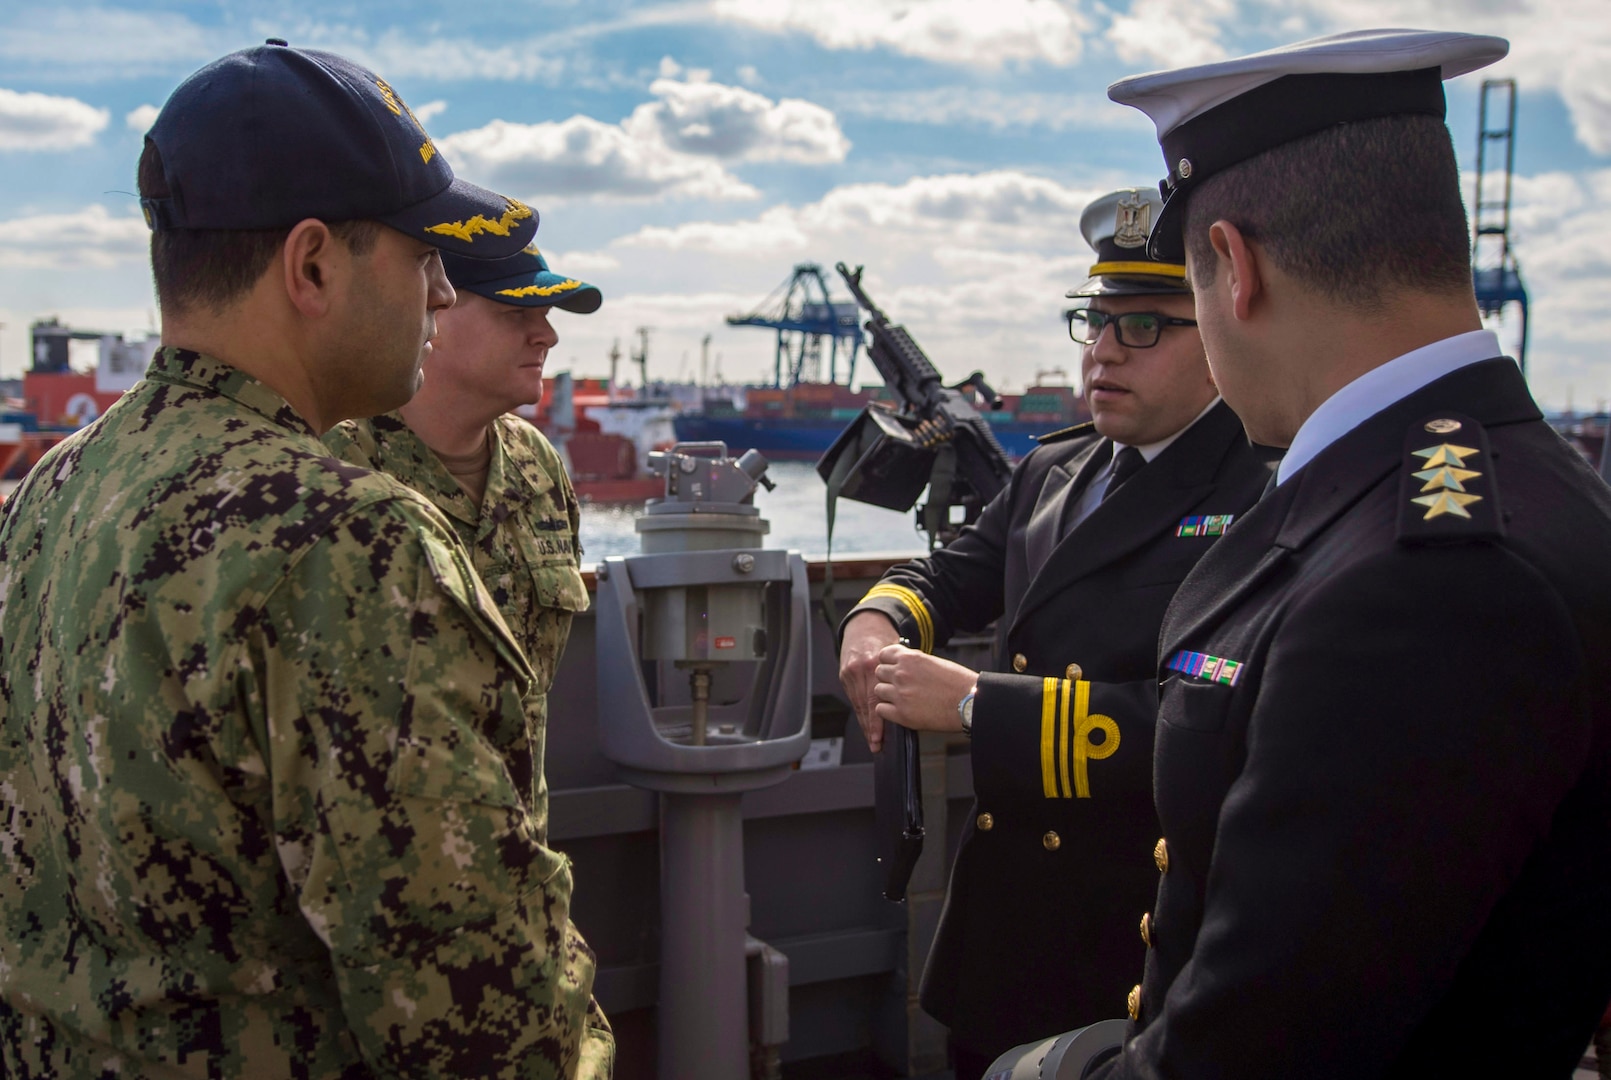 180116-N-KA046-0378 ALEXANDRIA, Egypt (Jan. 16, 2017) Cmdr. Tyson Young, executive officer, left, and Cmdr. Peter Halvorsen, commanding officer of the Arleigh Burke-class guided-missile destroyer USS Carney (DDG 64) speak with Egyptian naval officers on the bridge wing. Carney, forward-deployed to Rota, is on its fourth patrol in the U.S. 5th Fleet area of operations in support of maritime security operations to reassure allies and partners and preserve the freedom of navigation and free flow of commerce in the region. (U.S. Navy photo by Mass Communication Specialist 2nd Class James R. Turner/Released)